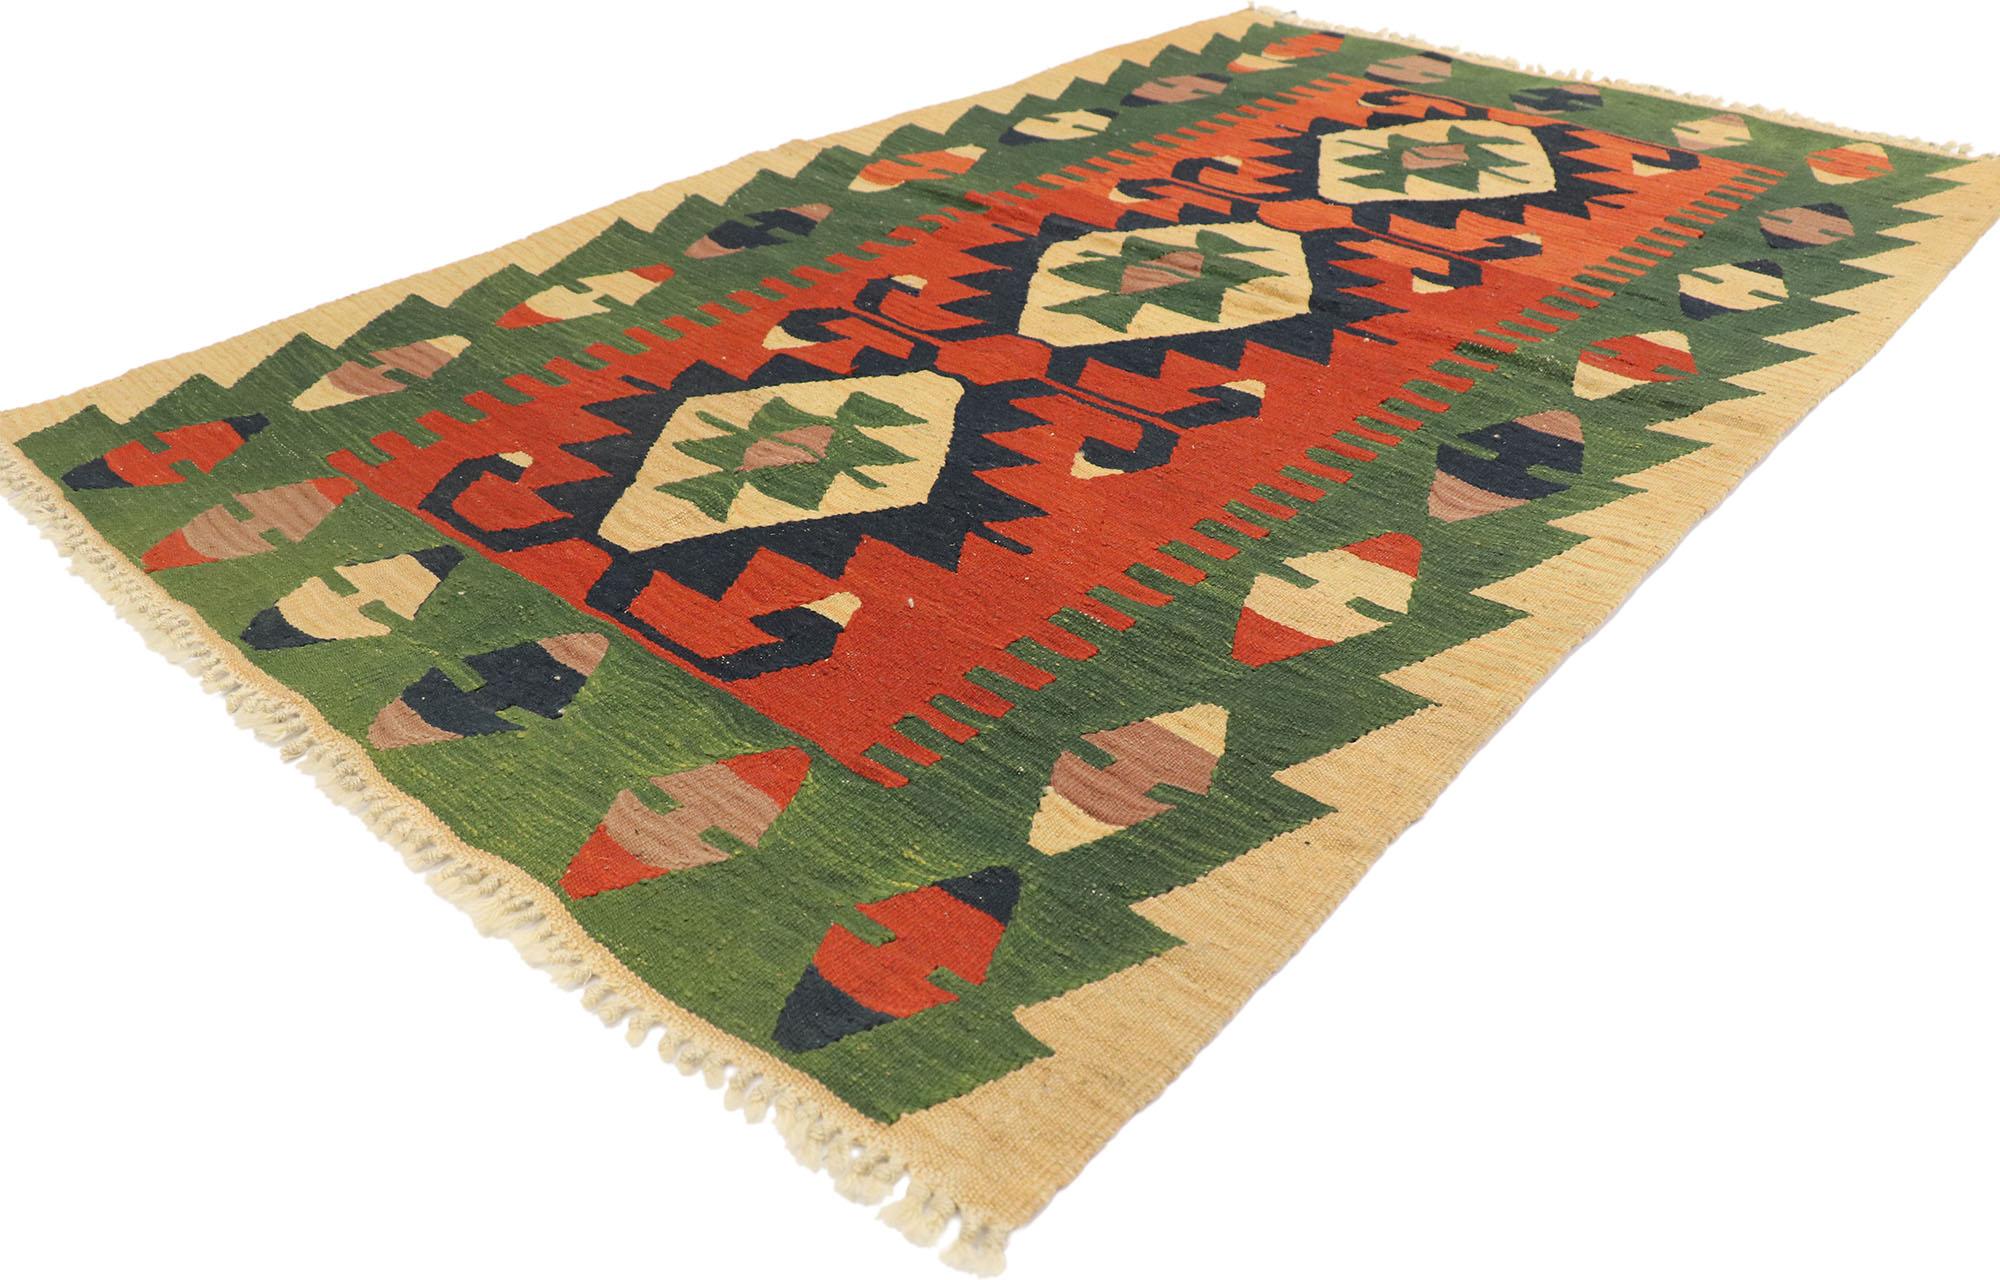 77981 Vintage Persian Shiraz Kilim rug with Tribal style 03'07 x 05'09. Full of tiny details and a bold expressive design combined with vibrant colors and tribal style, this hand-woven wool vintage Persian Shiraz kilim rug is a captivating vision of